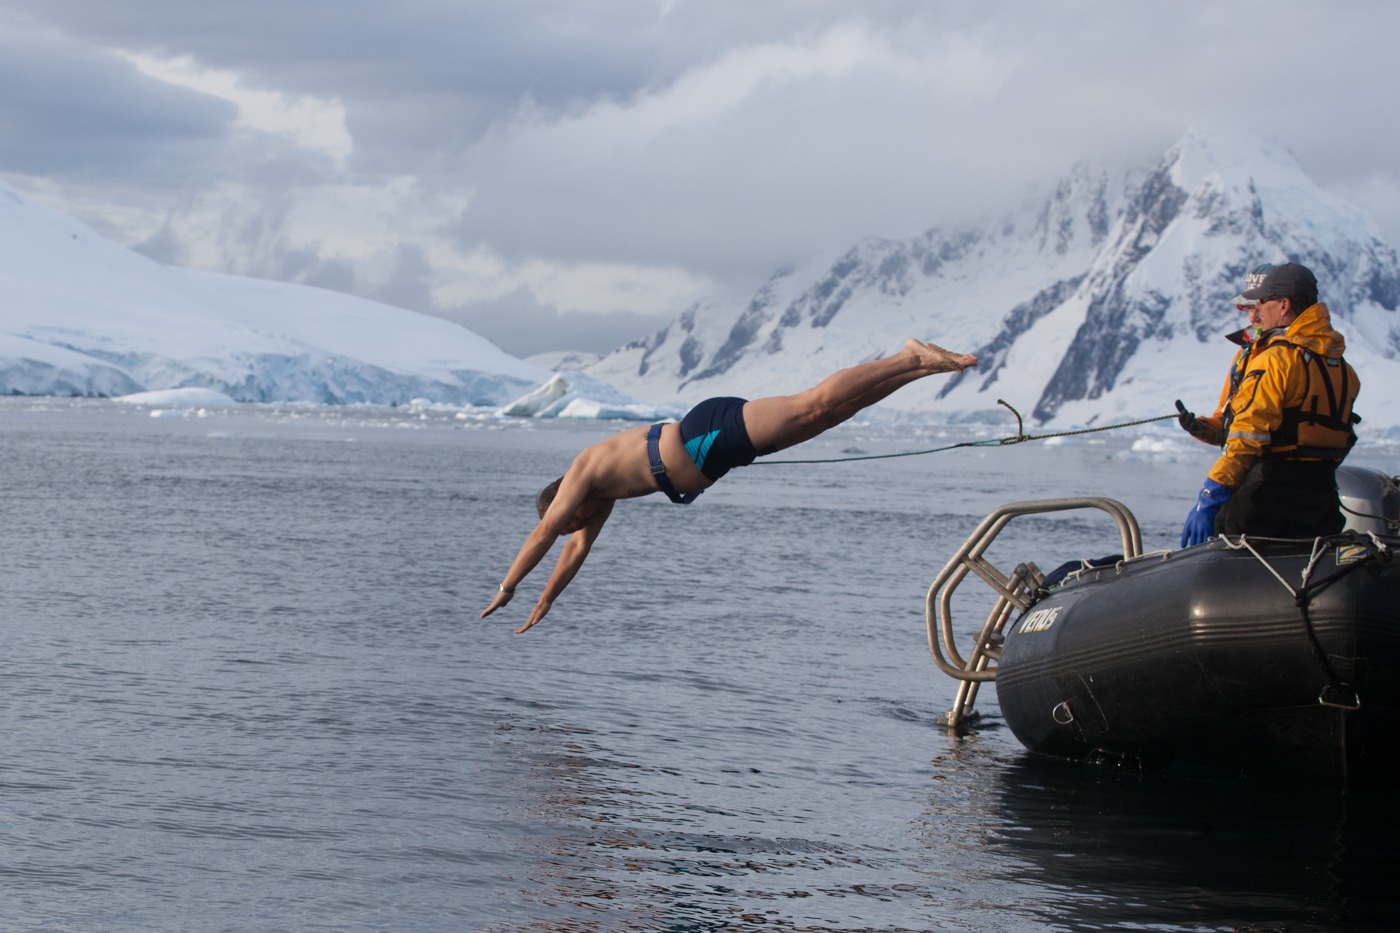 The Polar Plunge is a rite of passage many passengers take part in on Quark&apos;s small ship expeditions to the polar regions!